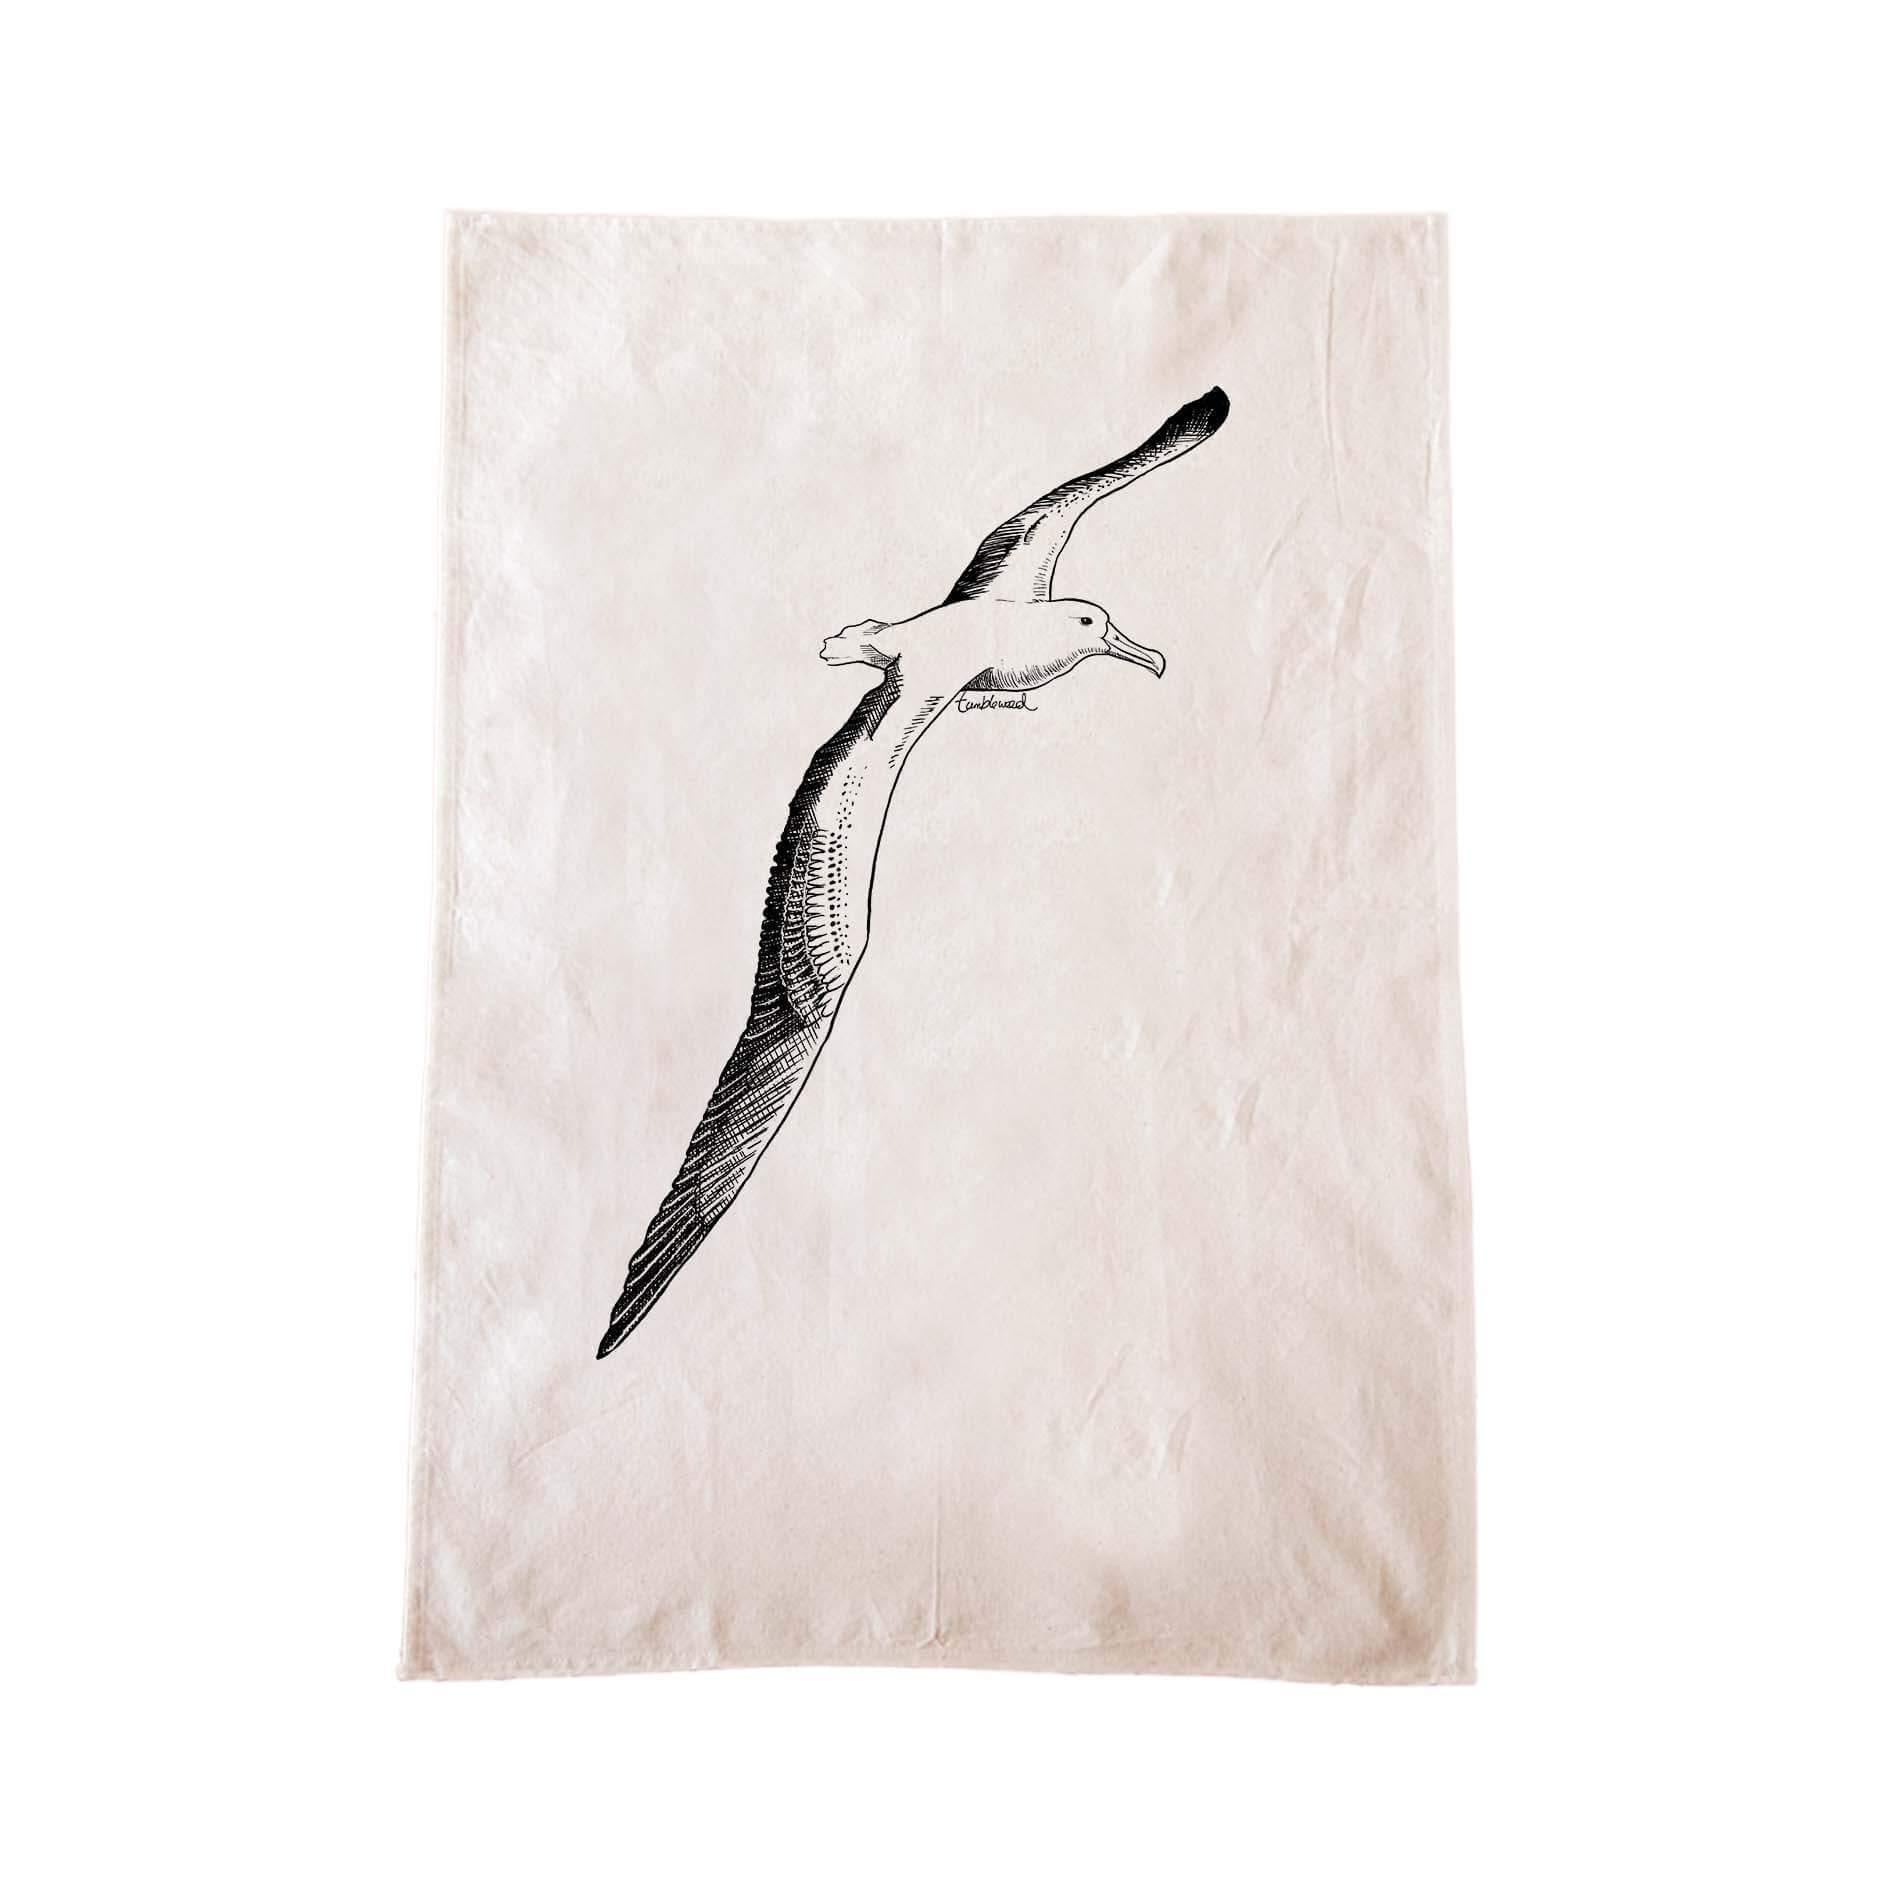 Off-white cotton tea towel with a screen printed Albatross design.